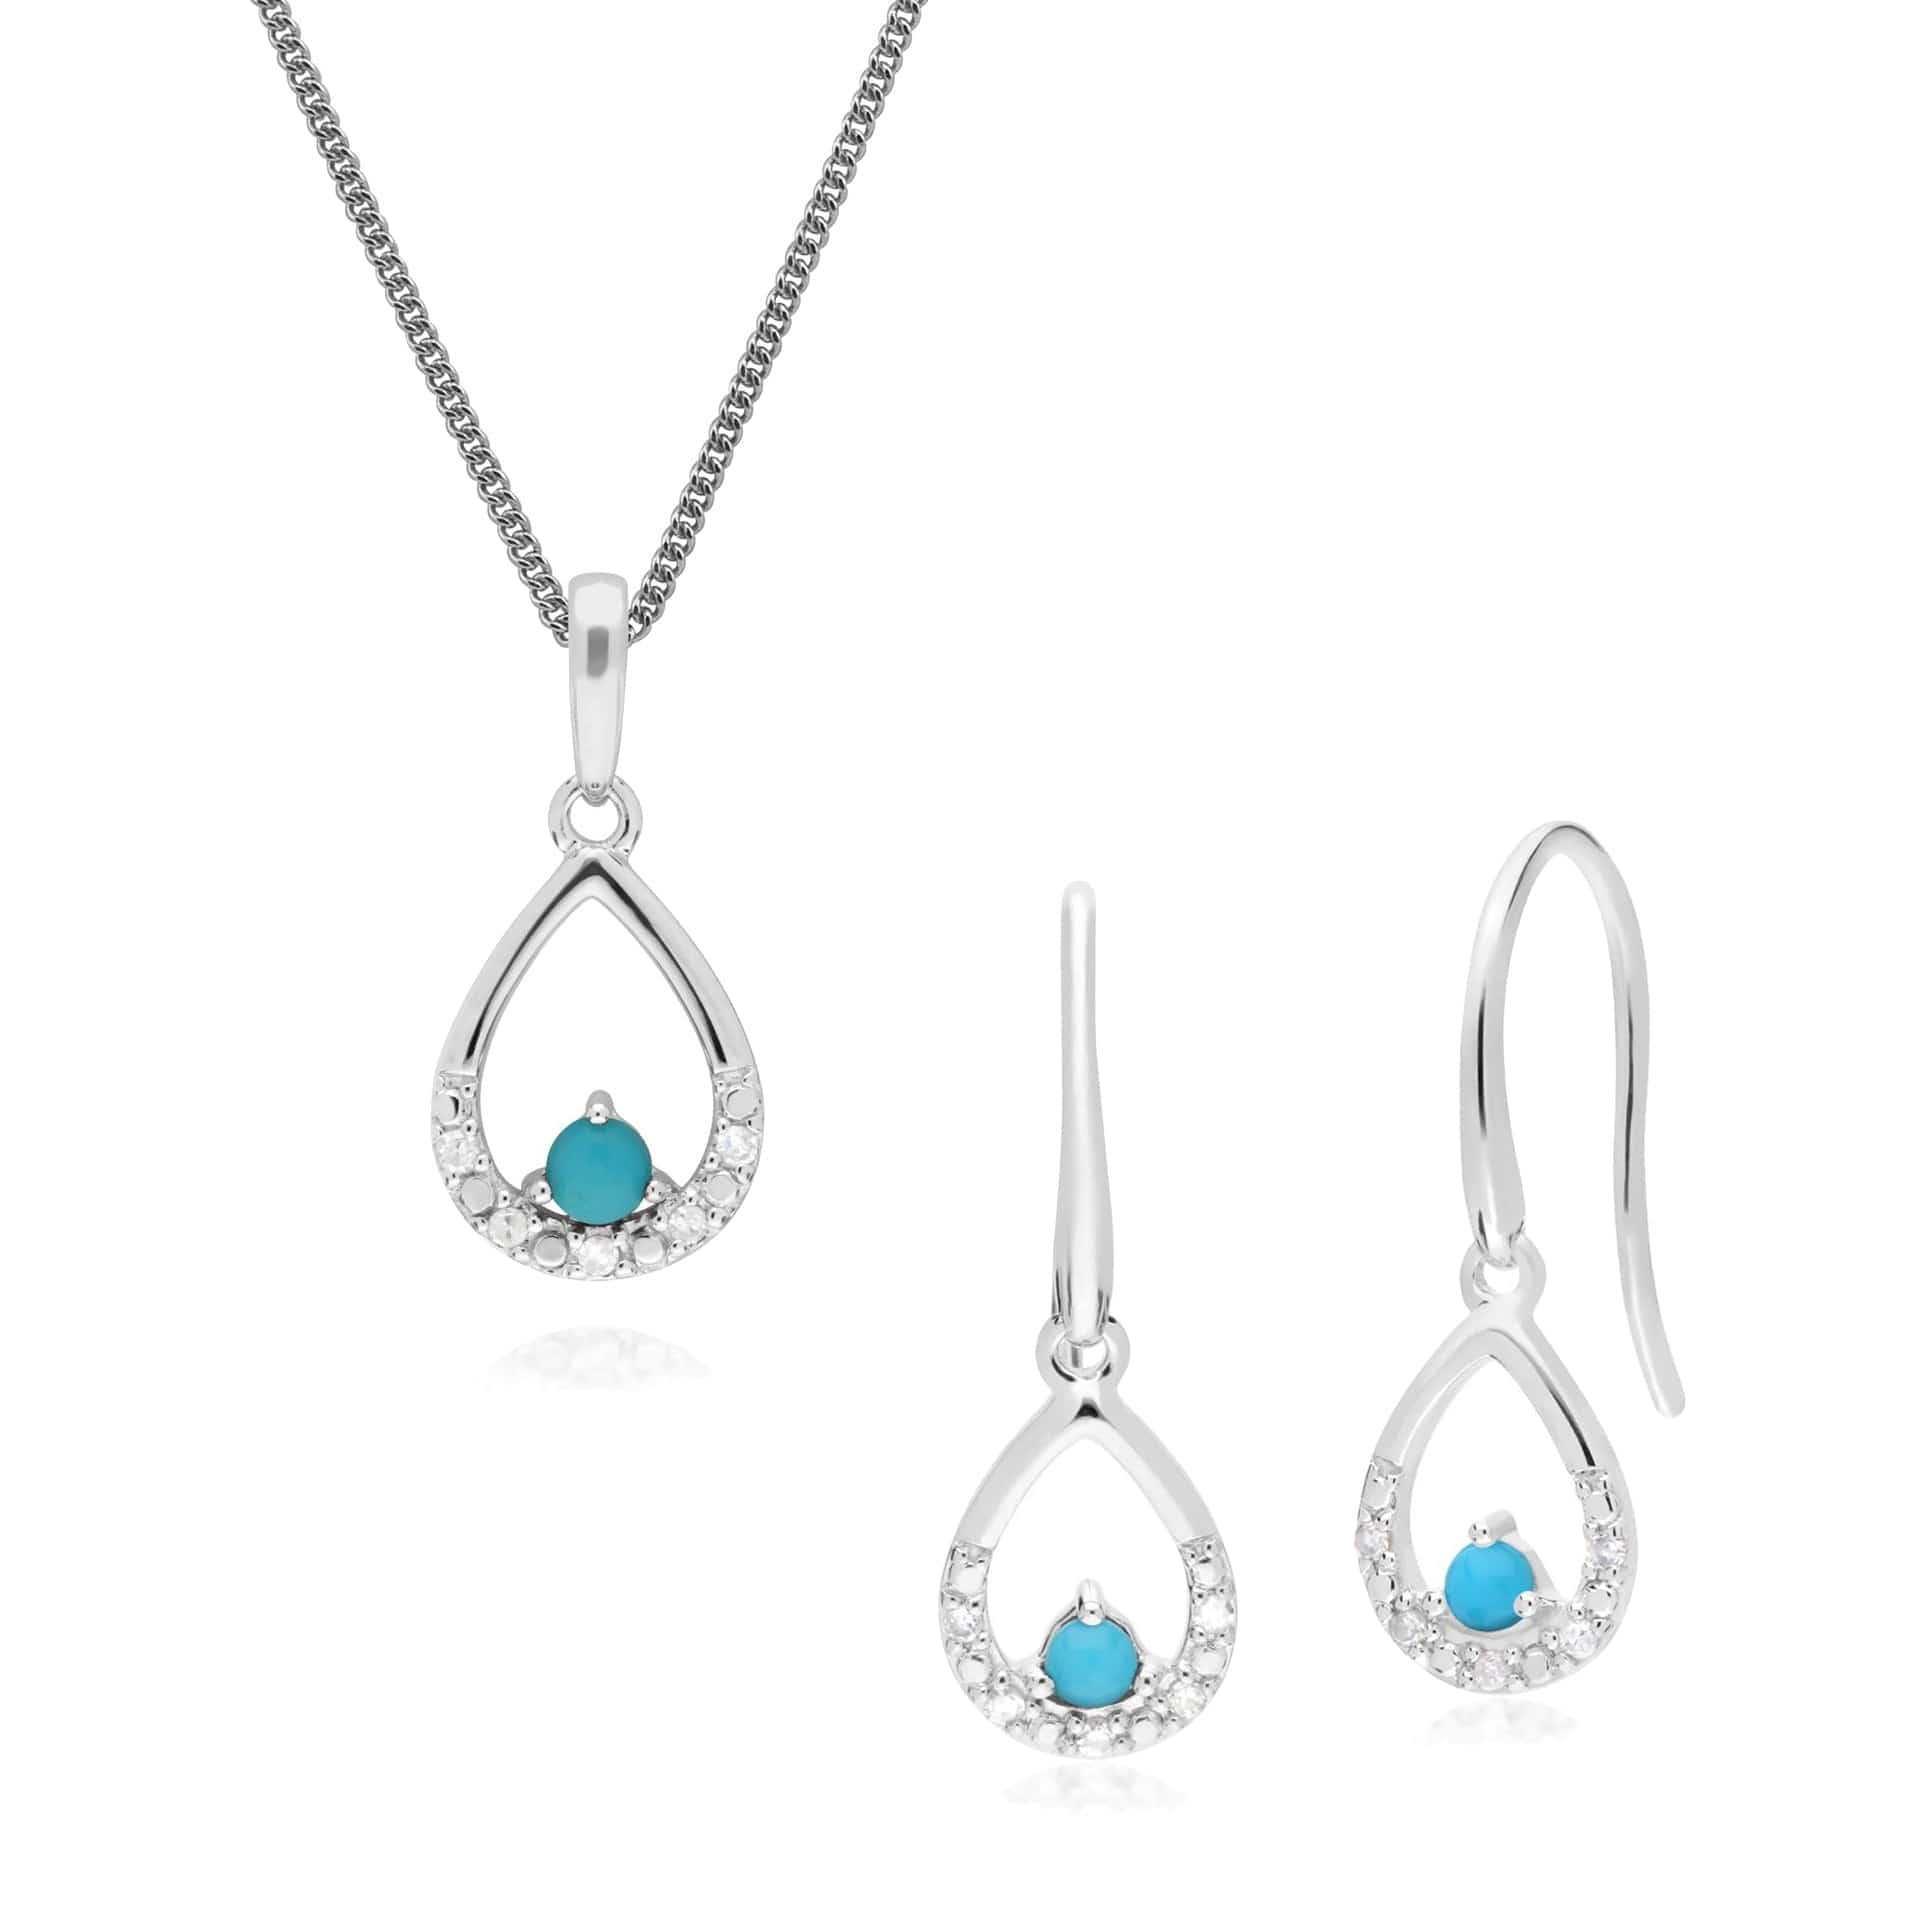 162E0261019-162P0222019 Classic Round Turquoise & Diamond Pear Drop Earrings & Pendant Set in 9ct White Gold 1